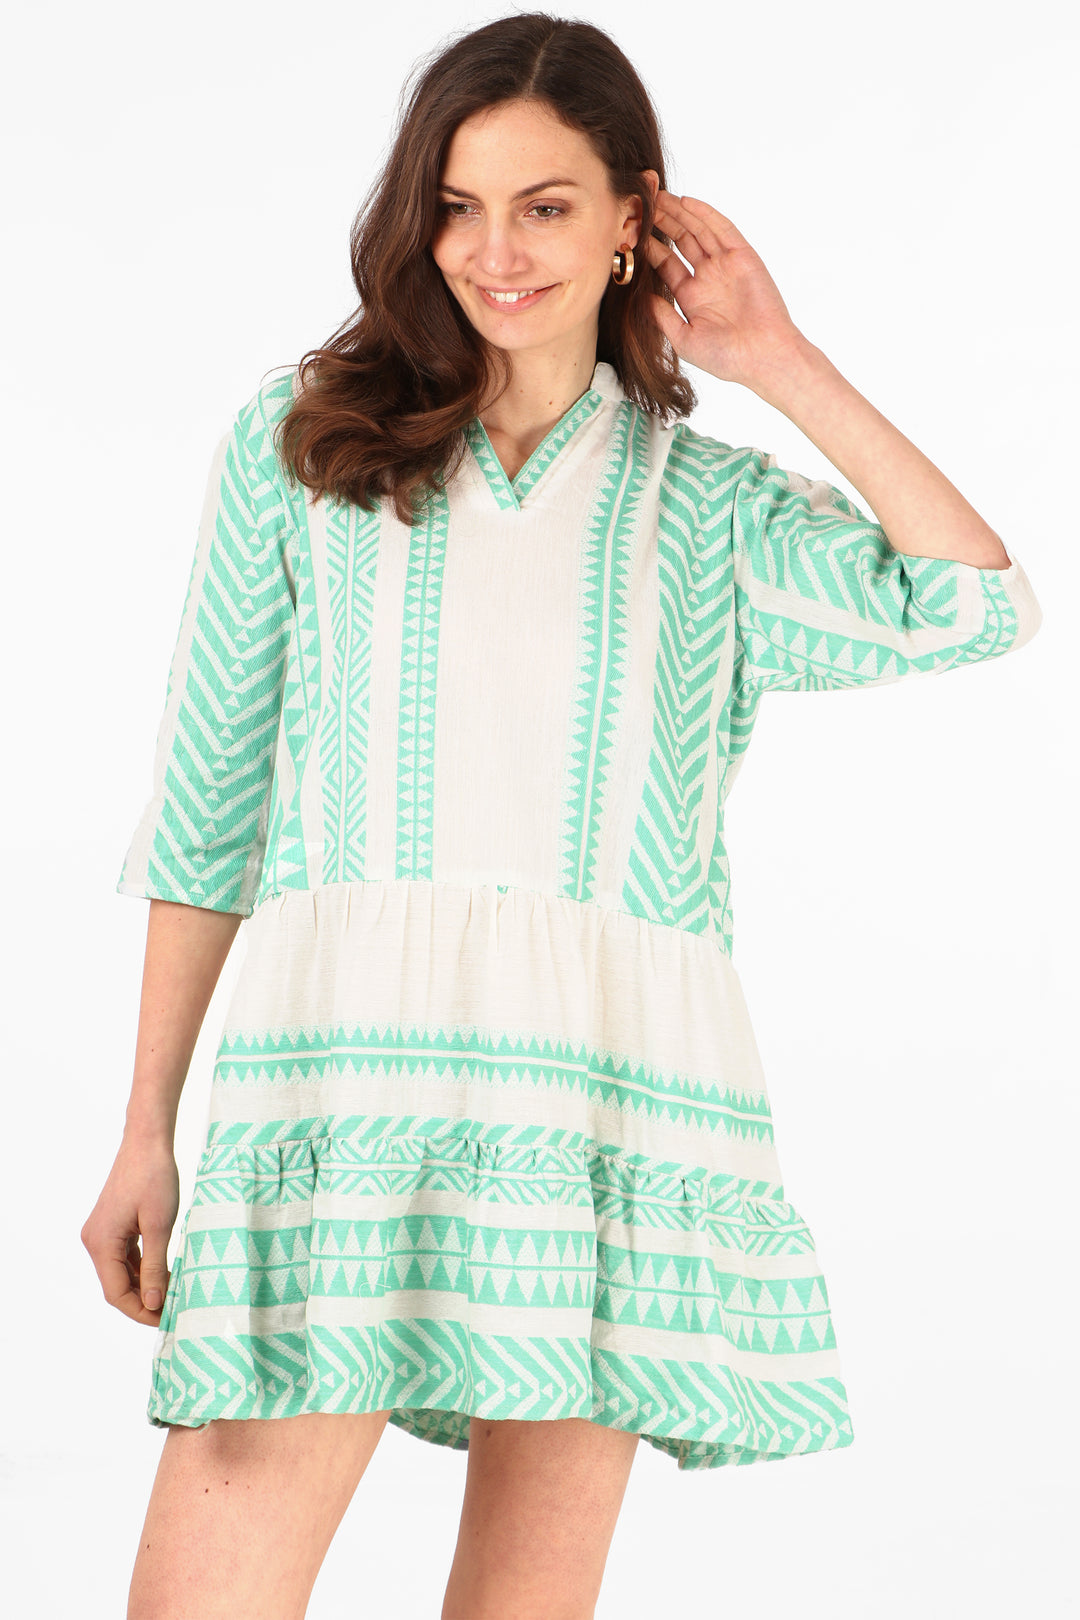 model wearing a cream and light green midi dress with an aztec print pattern and 3/4 sleeves